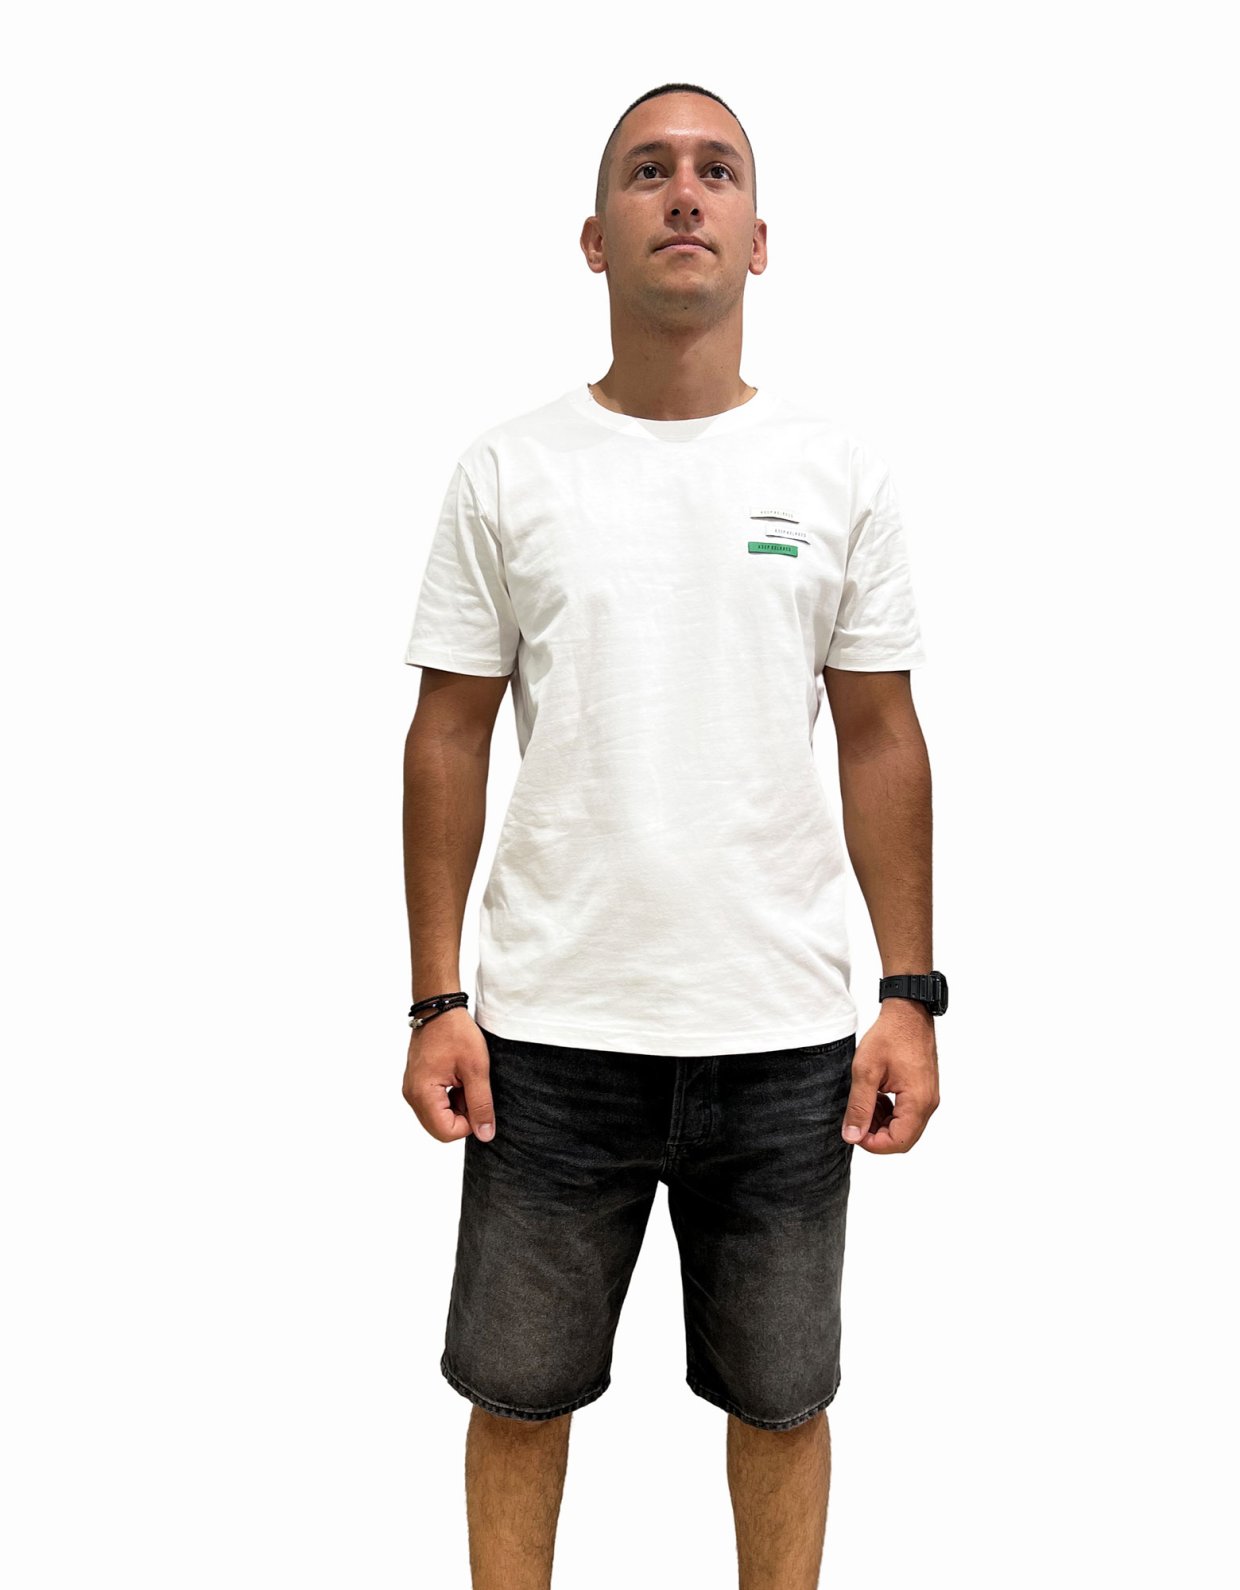 Gianni Lupo Keep relaxed t-shirt white